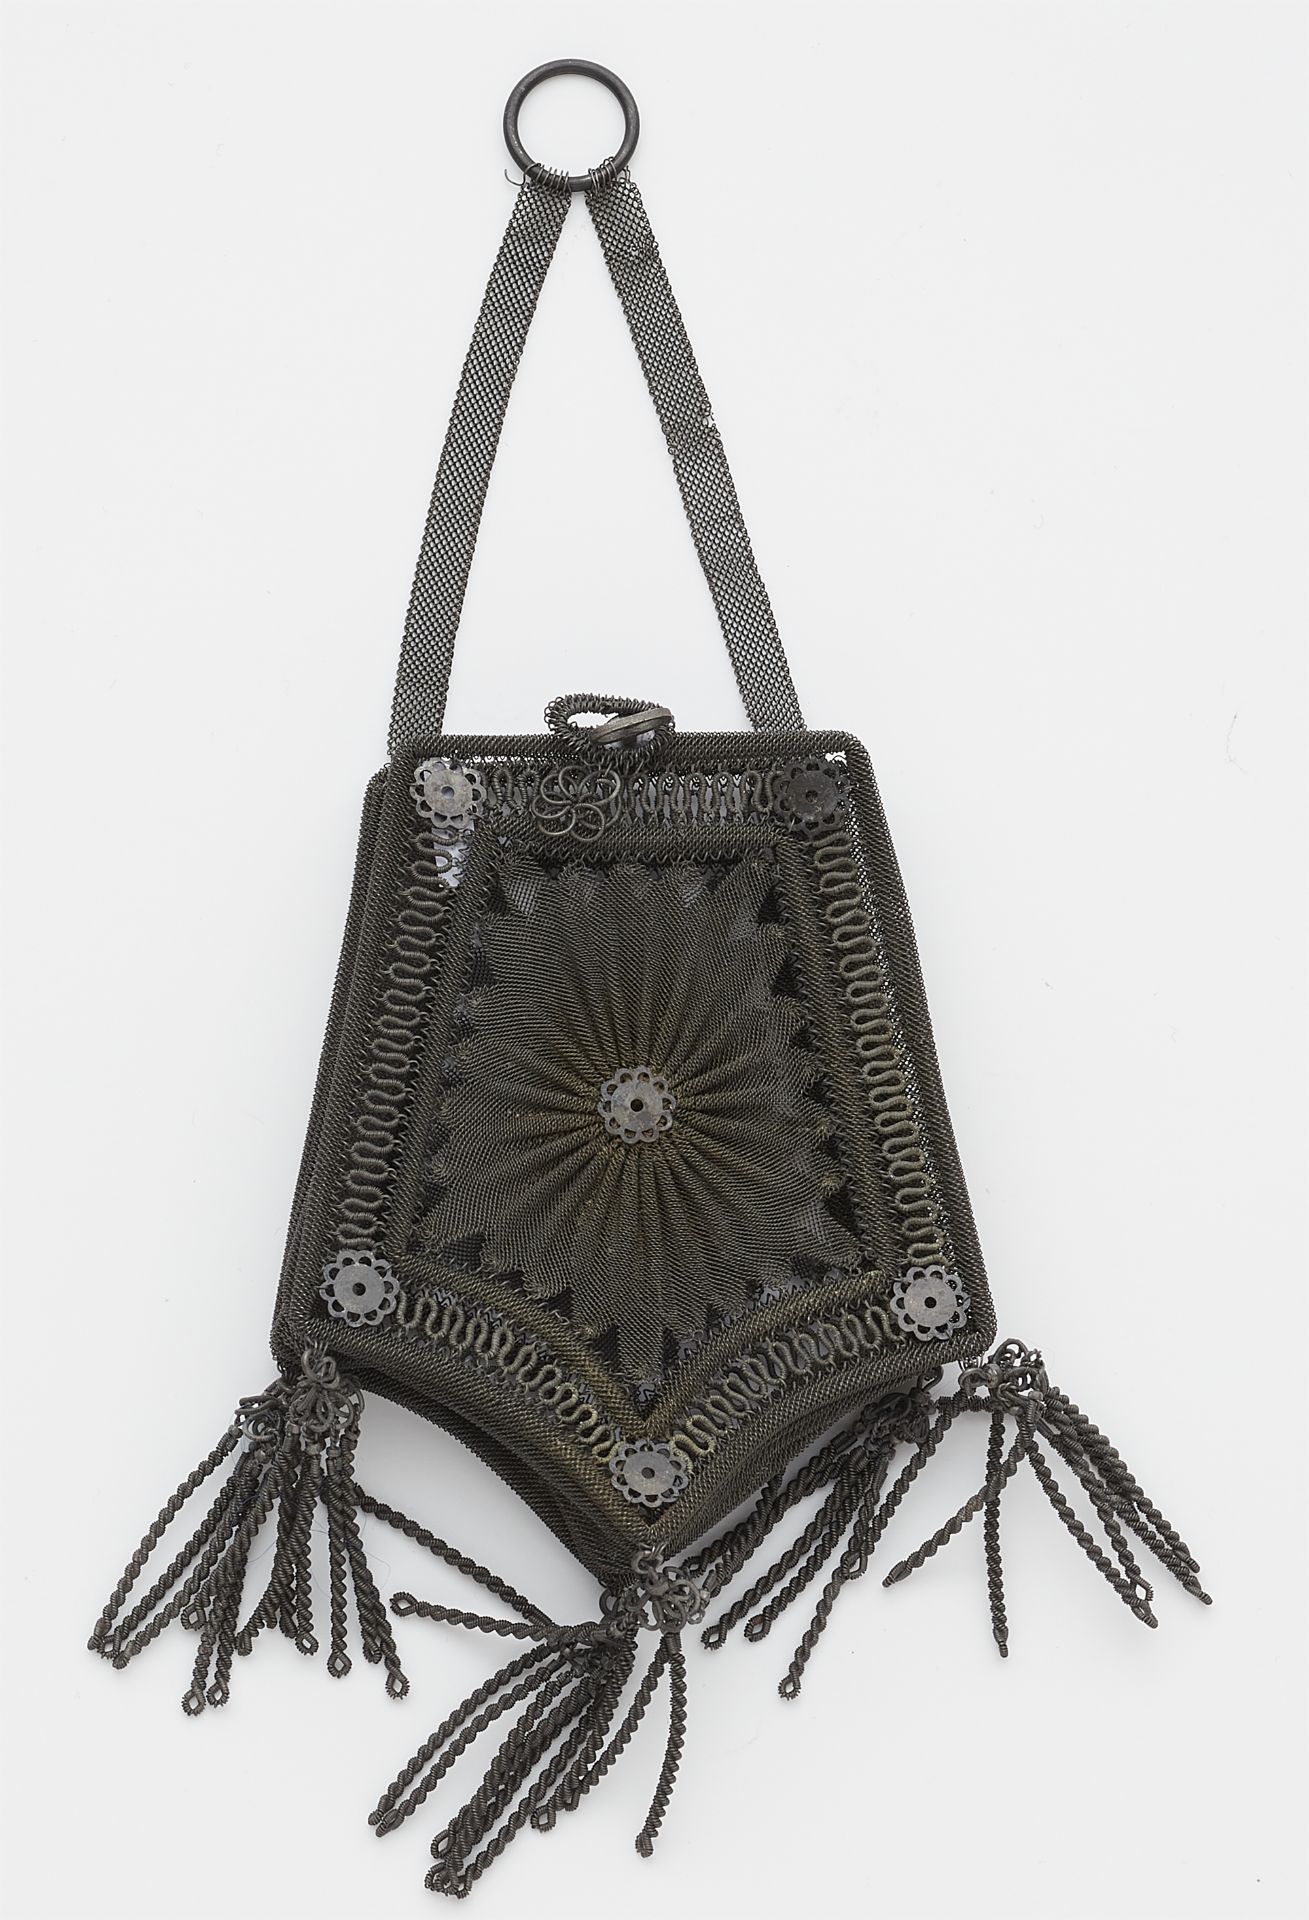 An small Berlin or Viennese gauze-like pouch woven from steel wire with tassel pendants. - Image 2 of 2